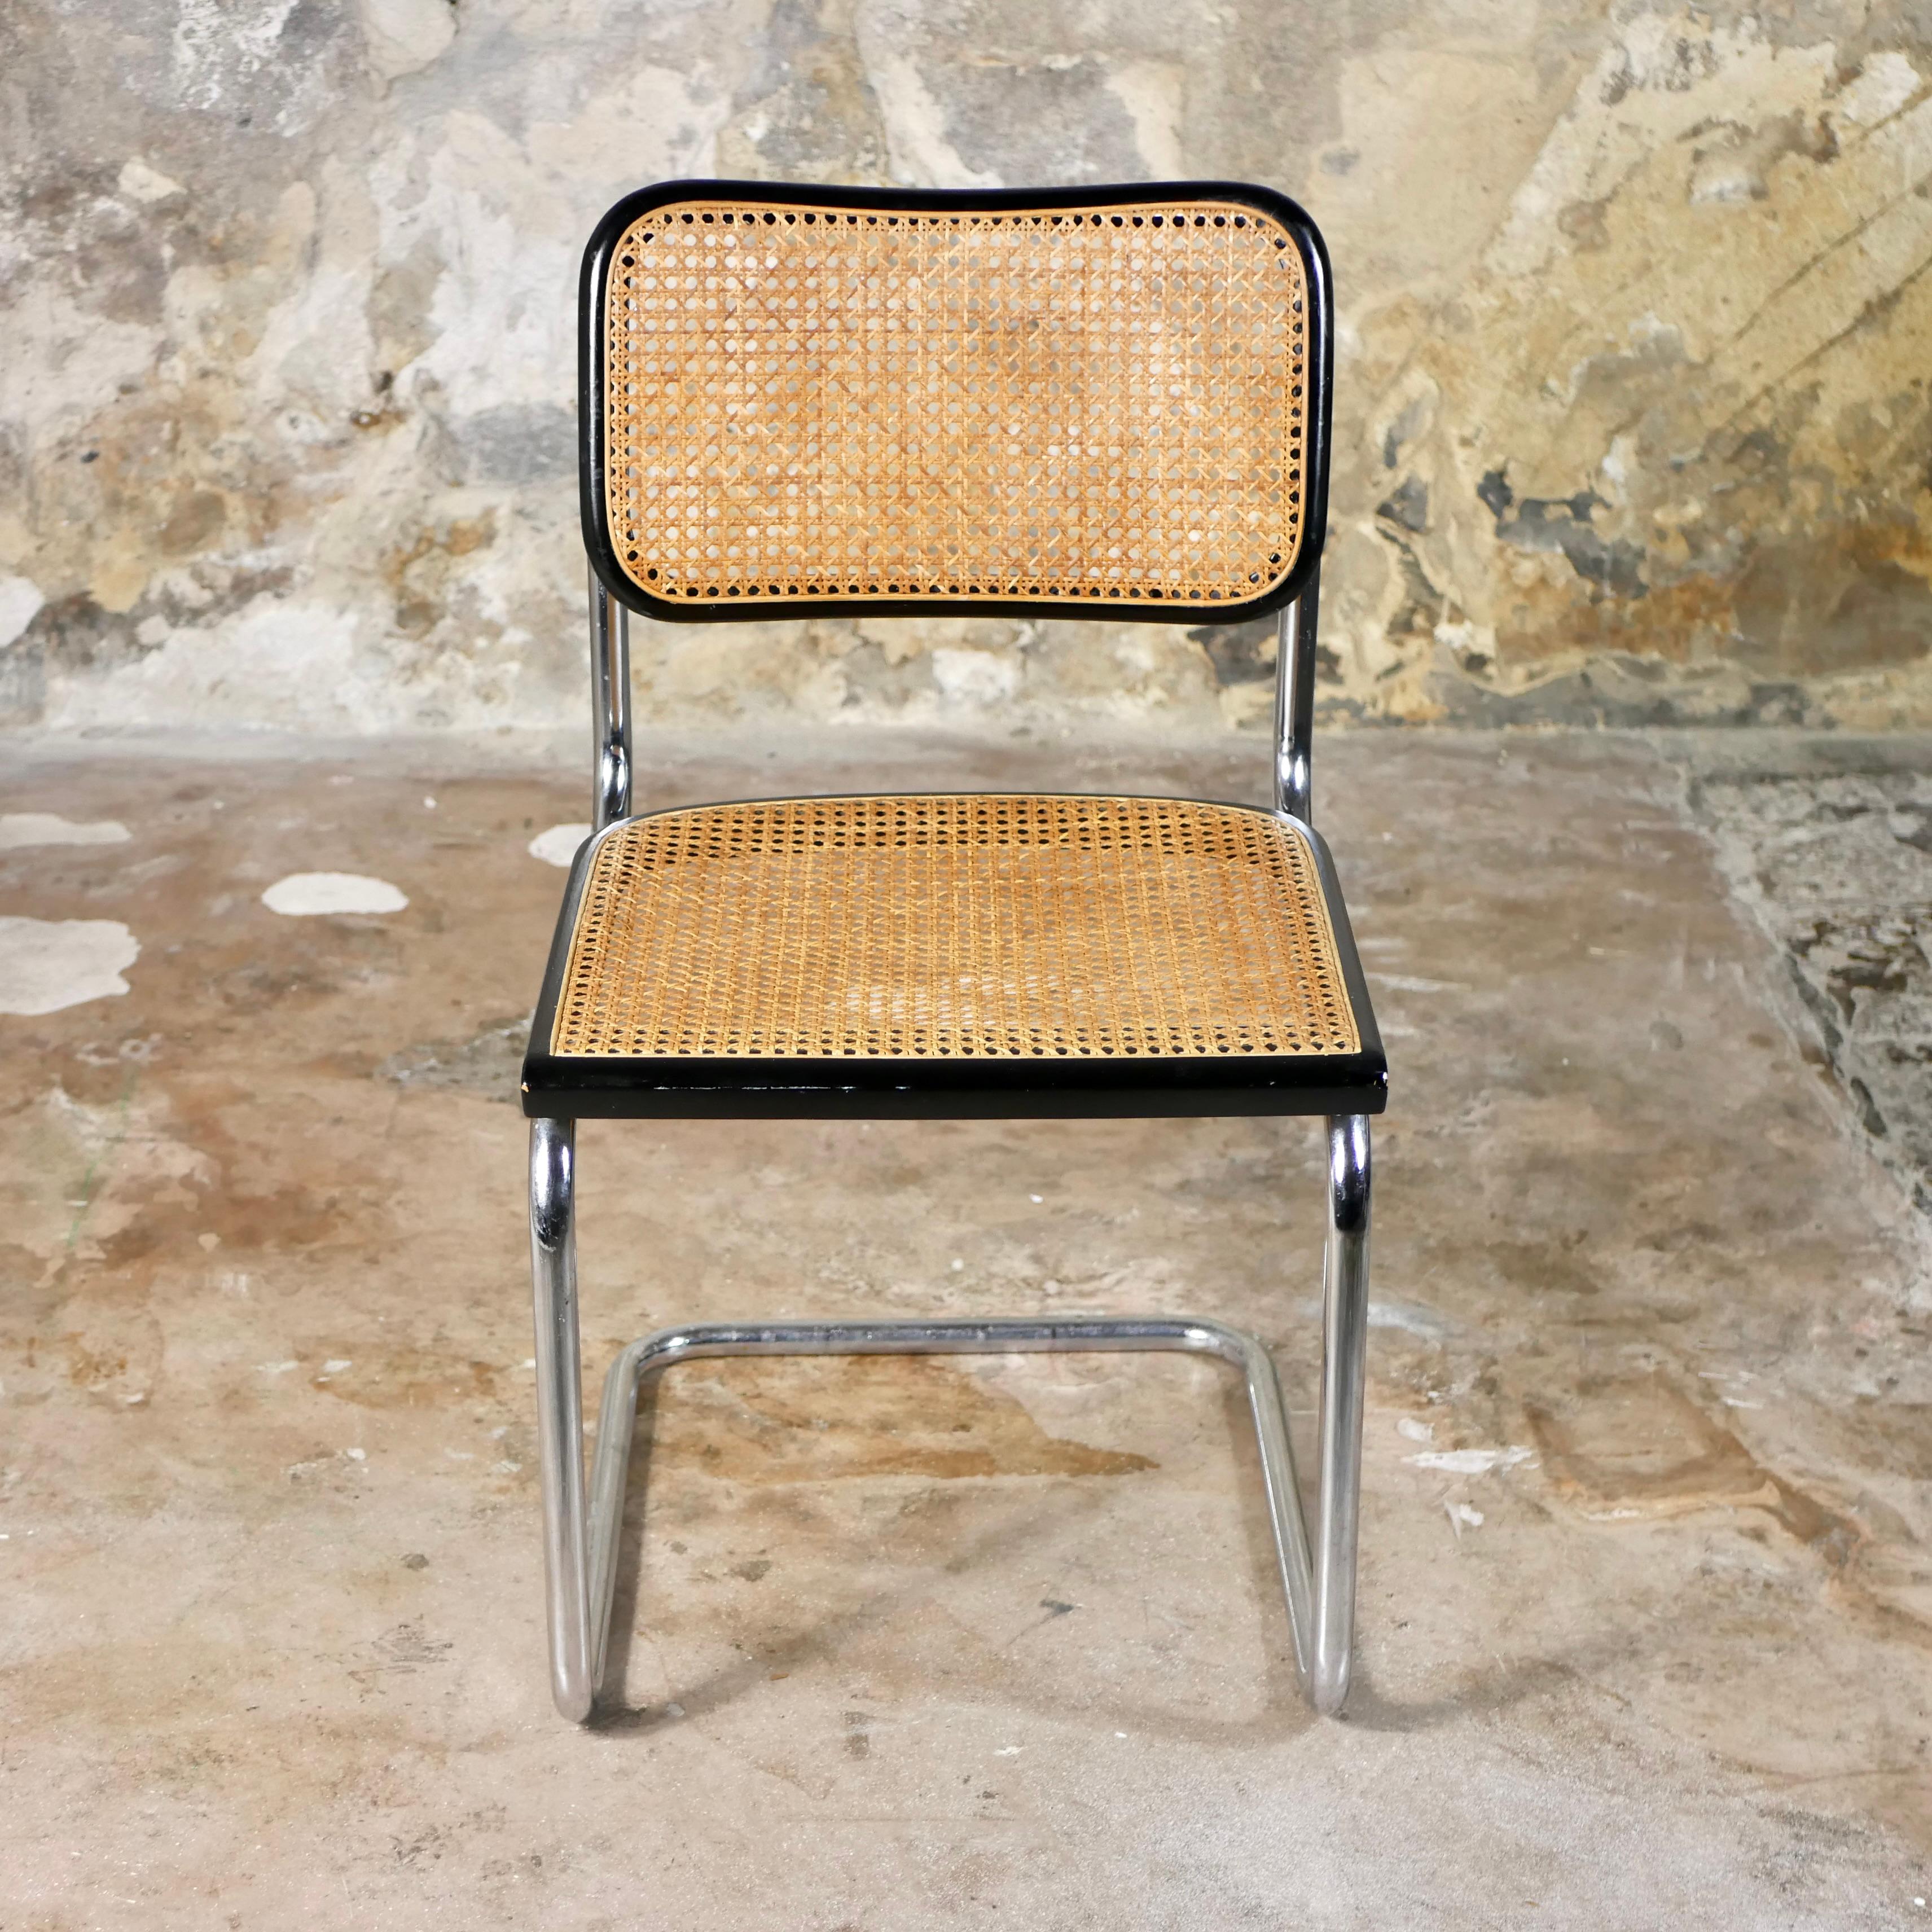 Bauhaus Cesca chair designed by Marcel Breuer, made in Italy, 1970